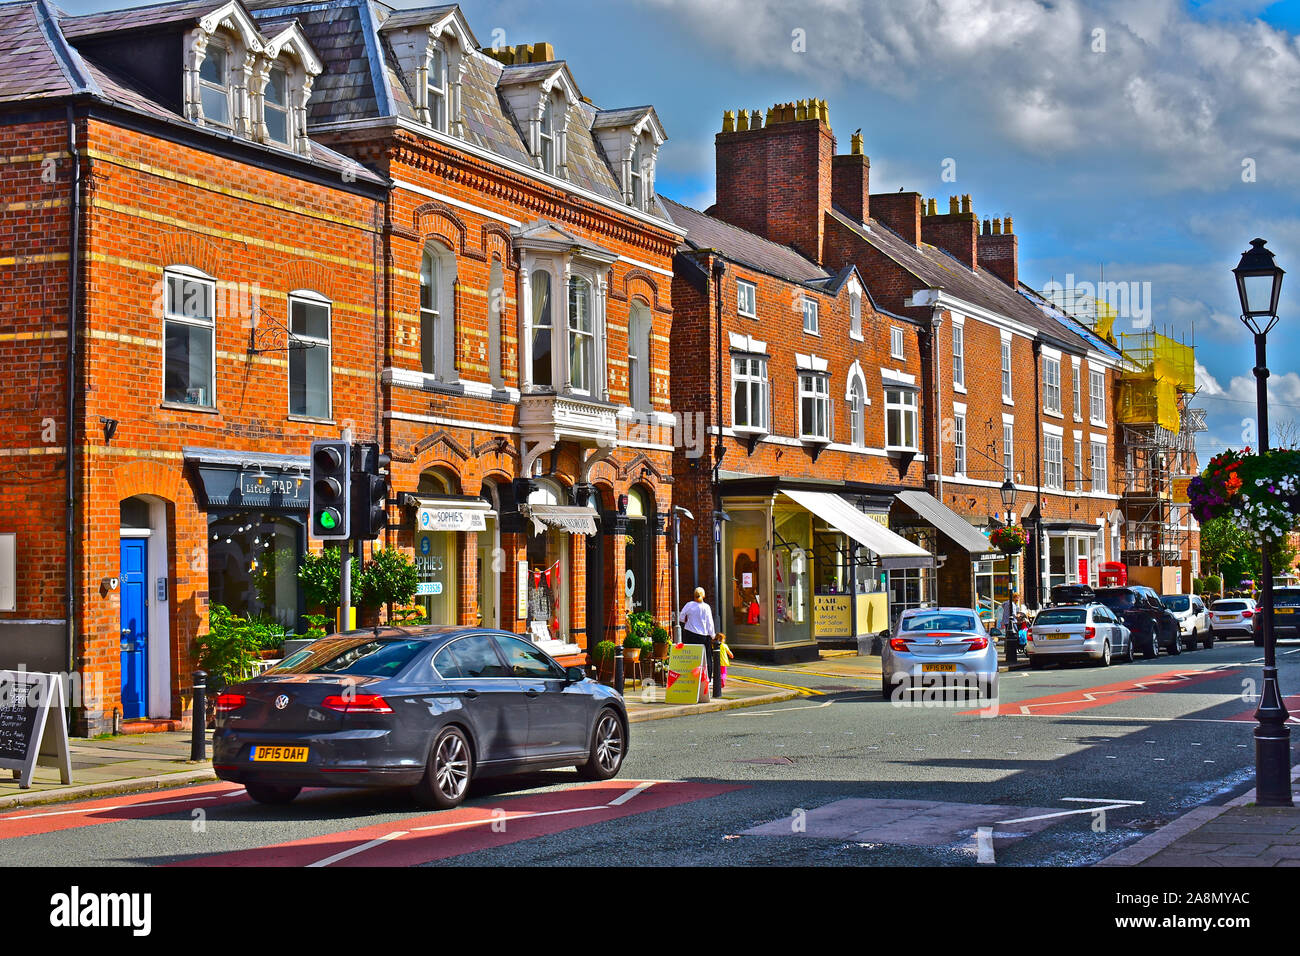 A typical row of red brick buildings in the centre of the quaint rural village of Tarporley. High Street shops mainly small local businesses. Stock Photo